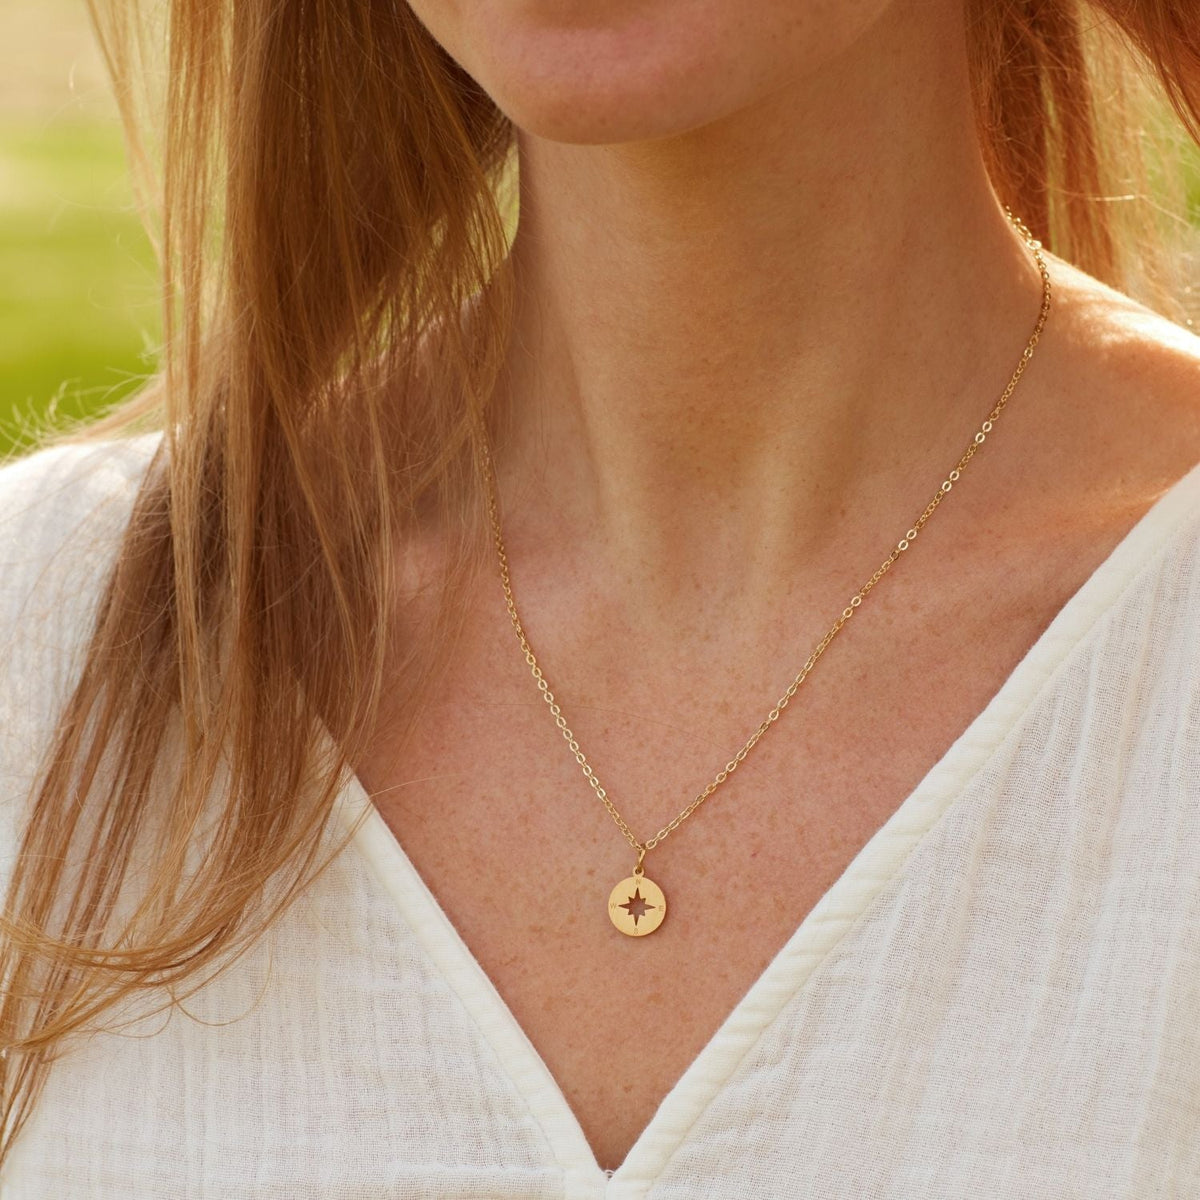 Will You Be My Godmother? | Guide Me, Love Me, Keep Me Safe | Compass Necklace